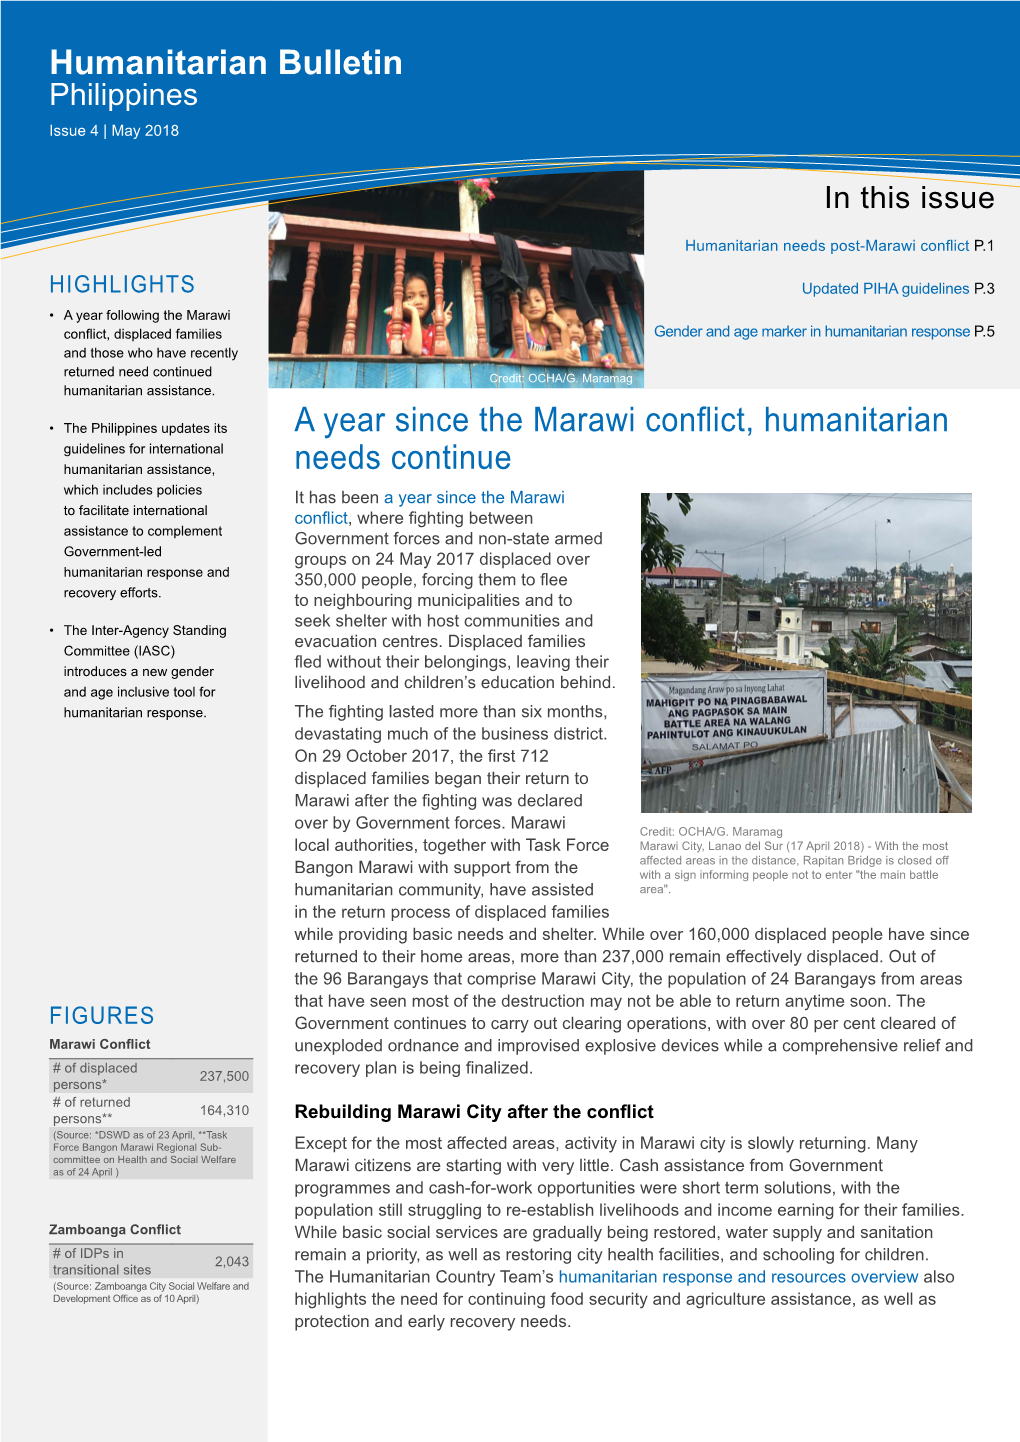 Humanitarian Bulletin Philippines Issue 4 | May 2018